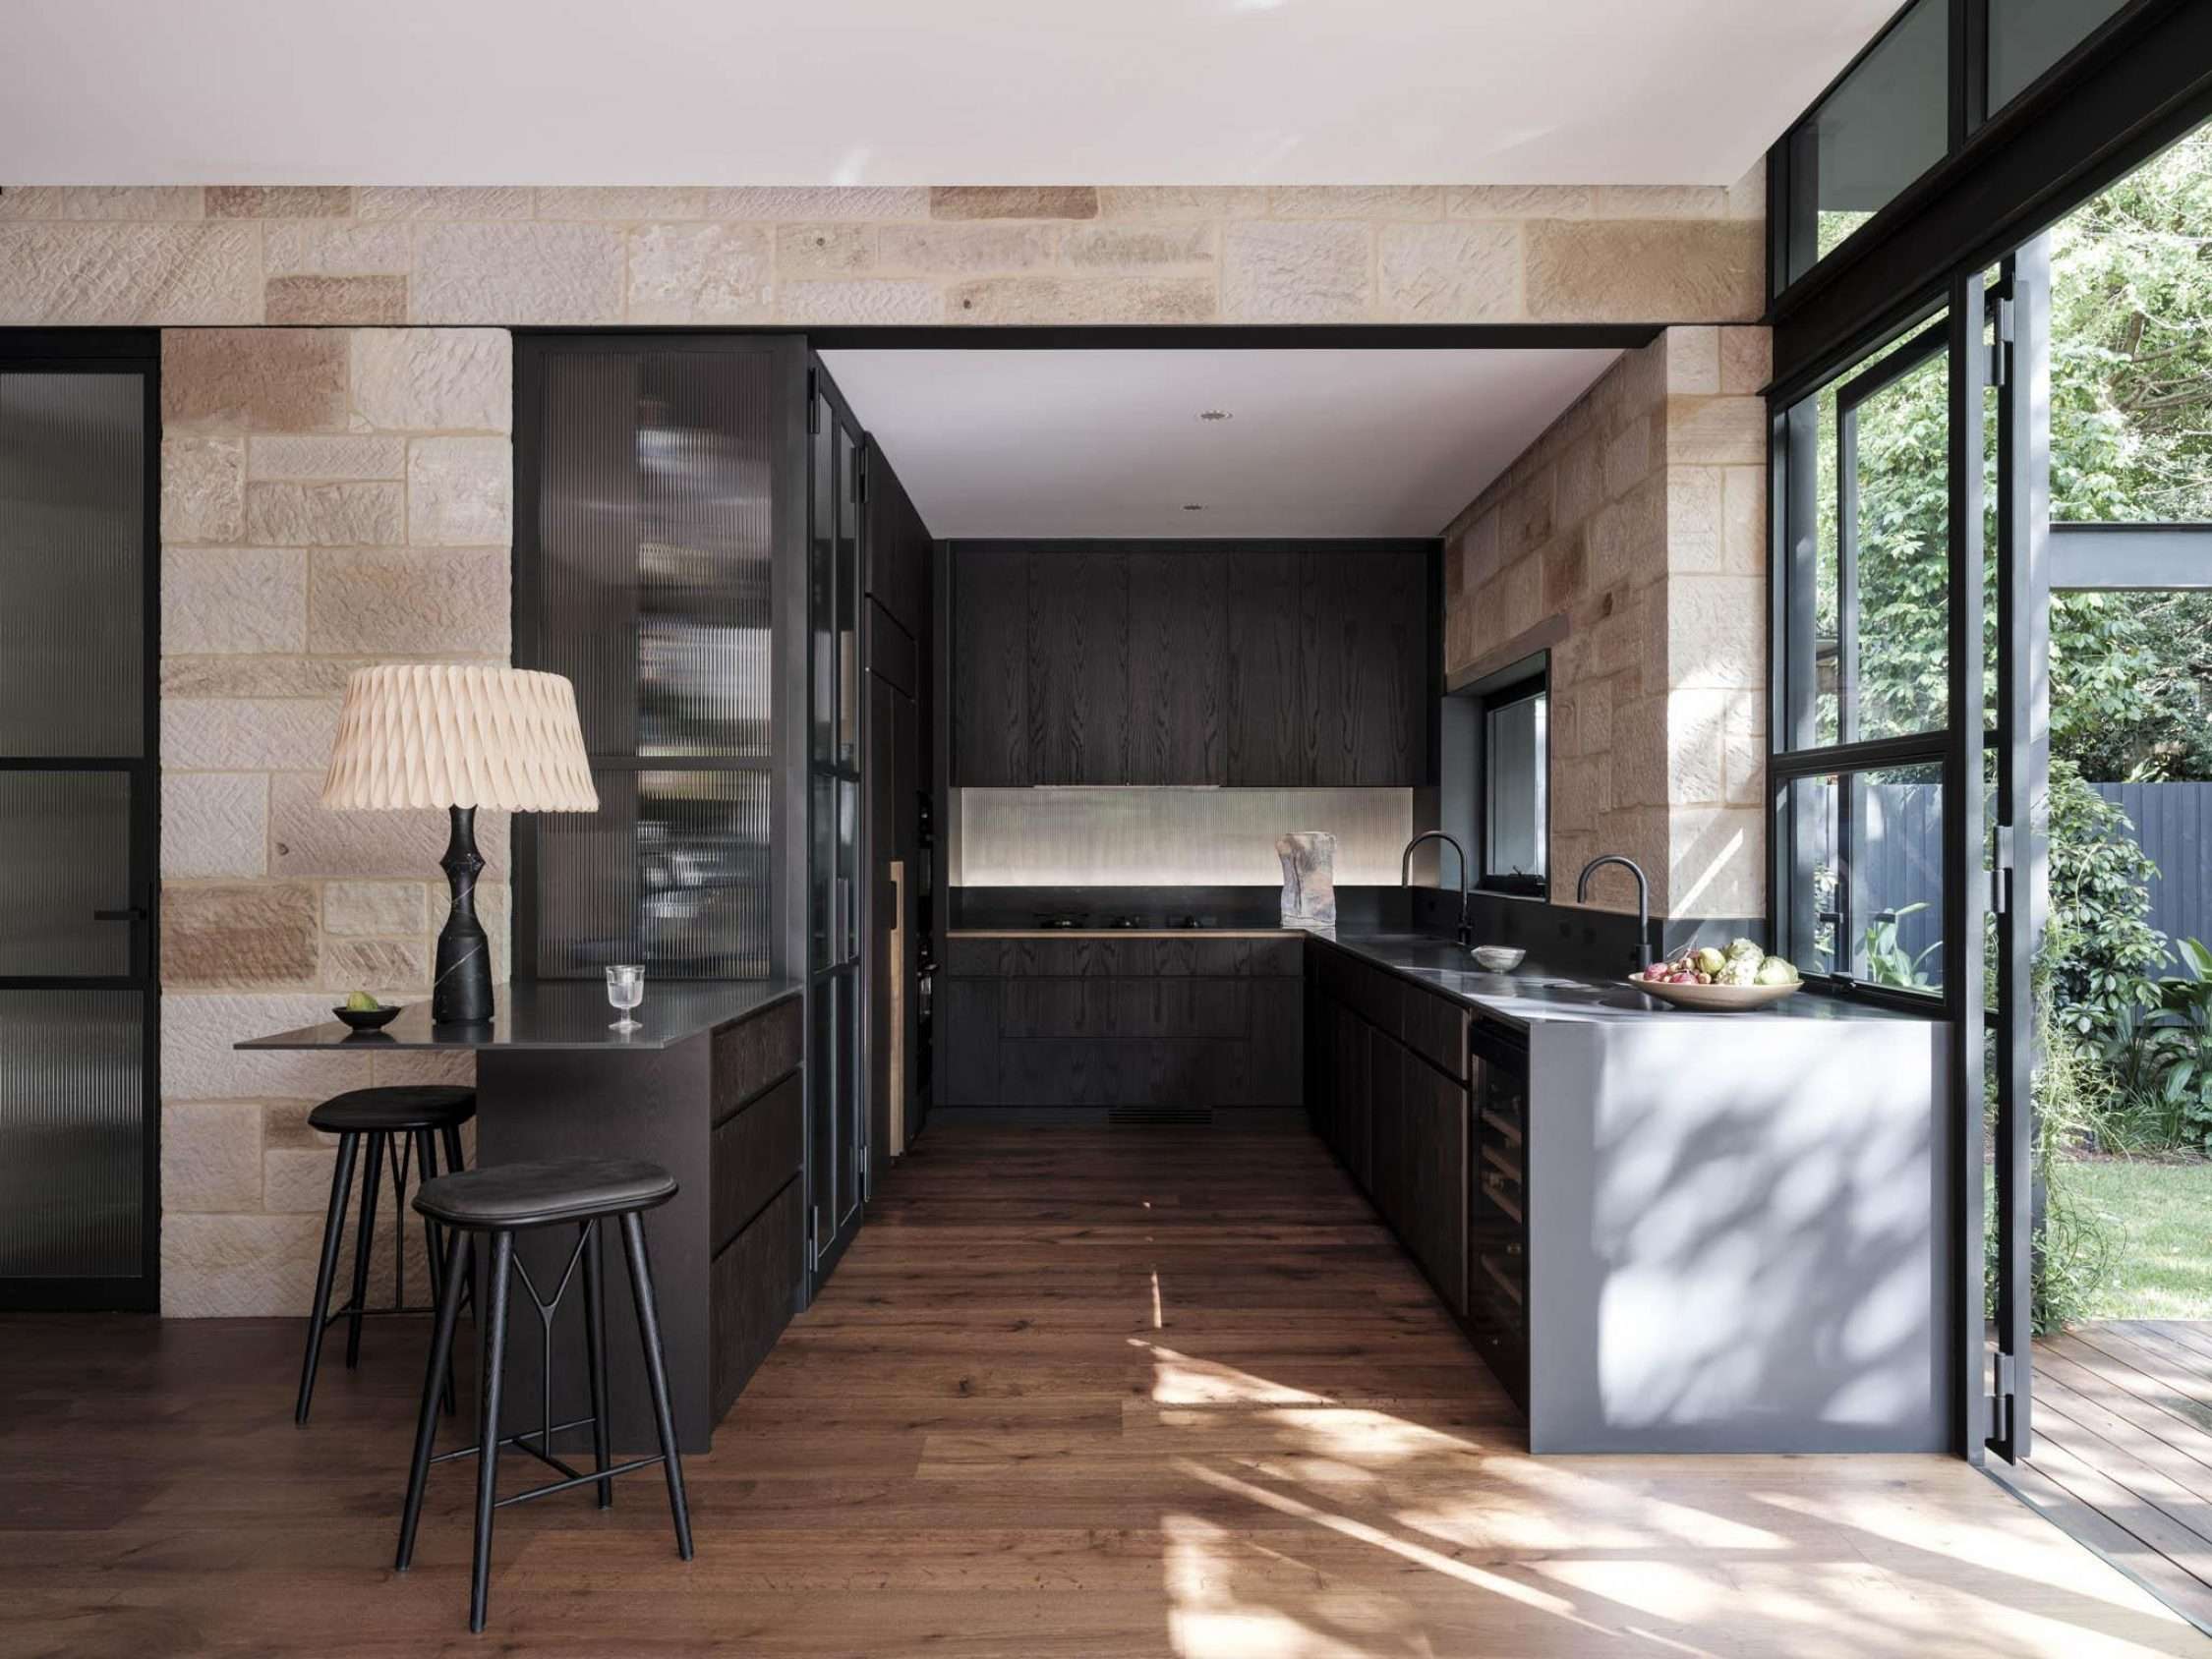 Maranatha House by BIJL Architecture showing an interior view of the kitchen with sandstone walls and dark timber joinery